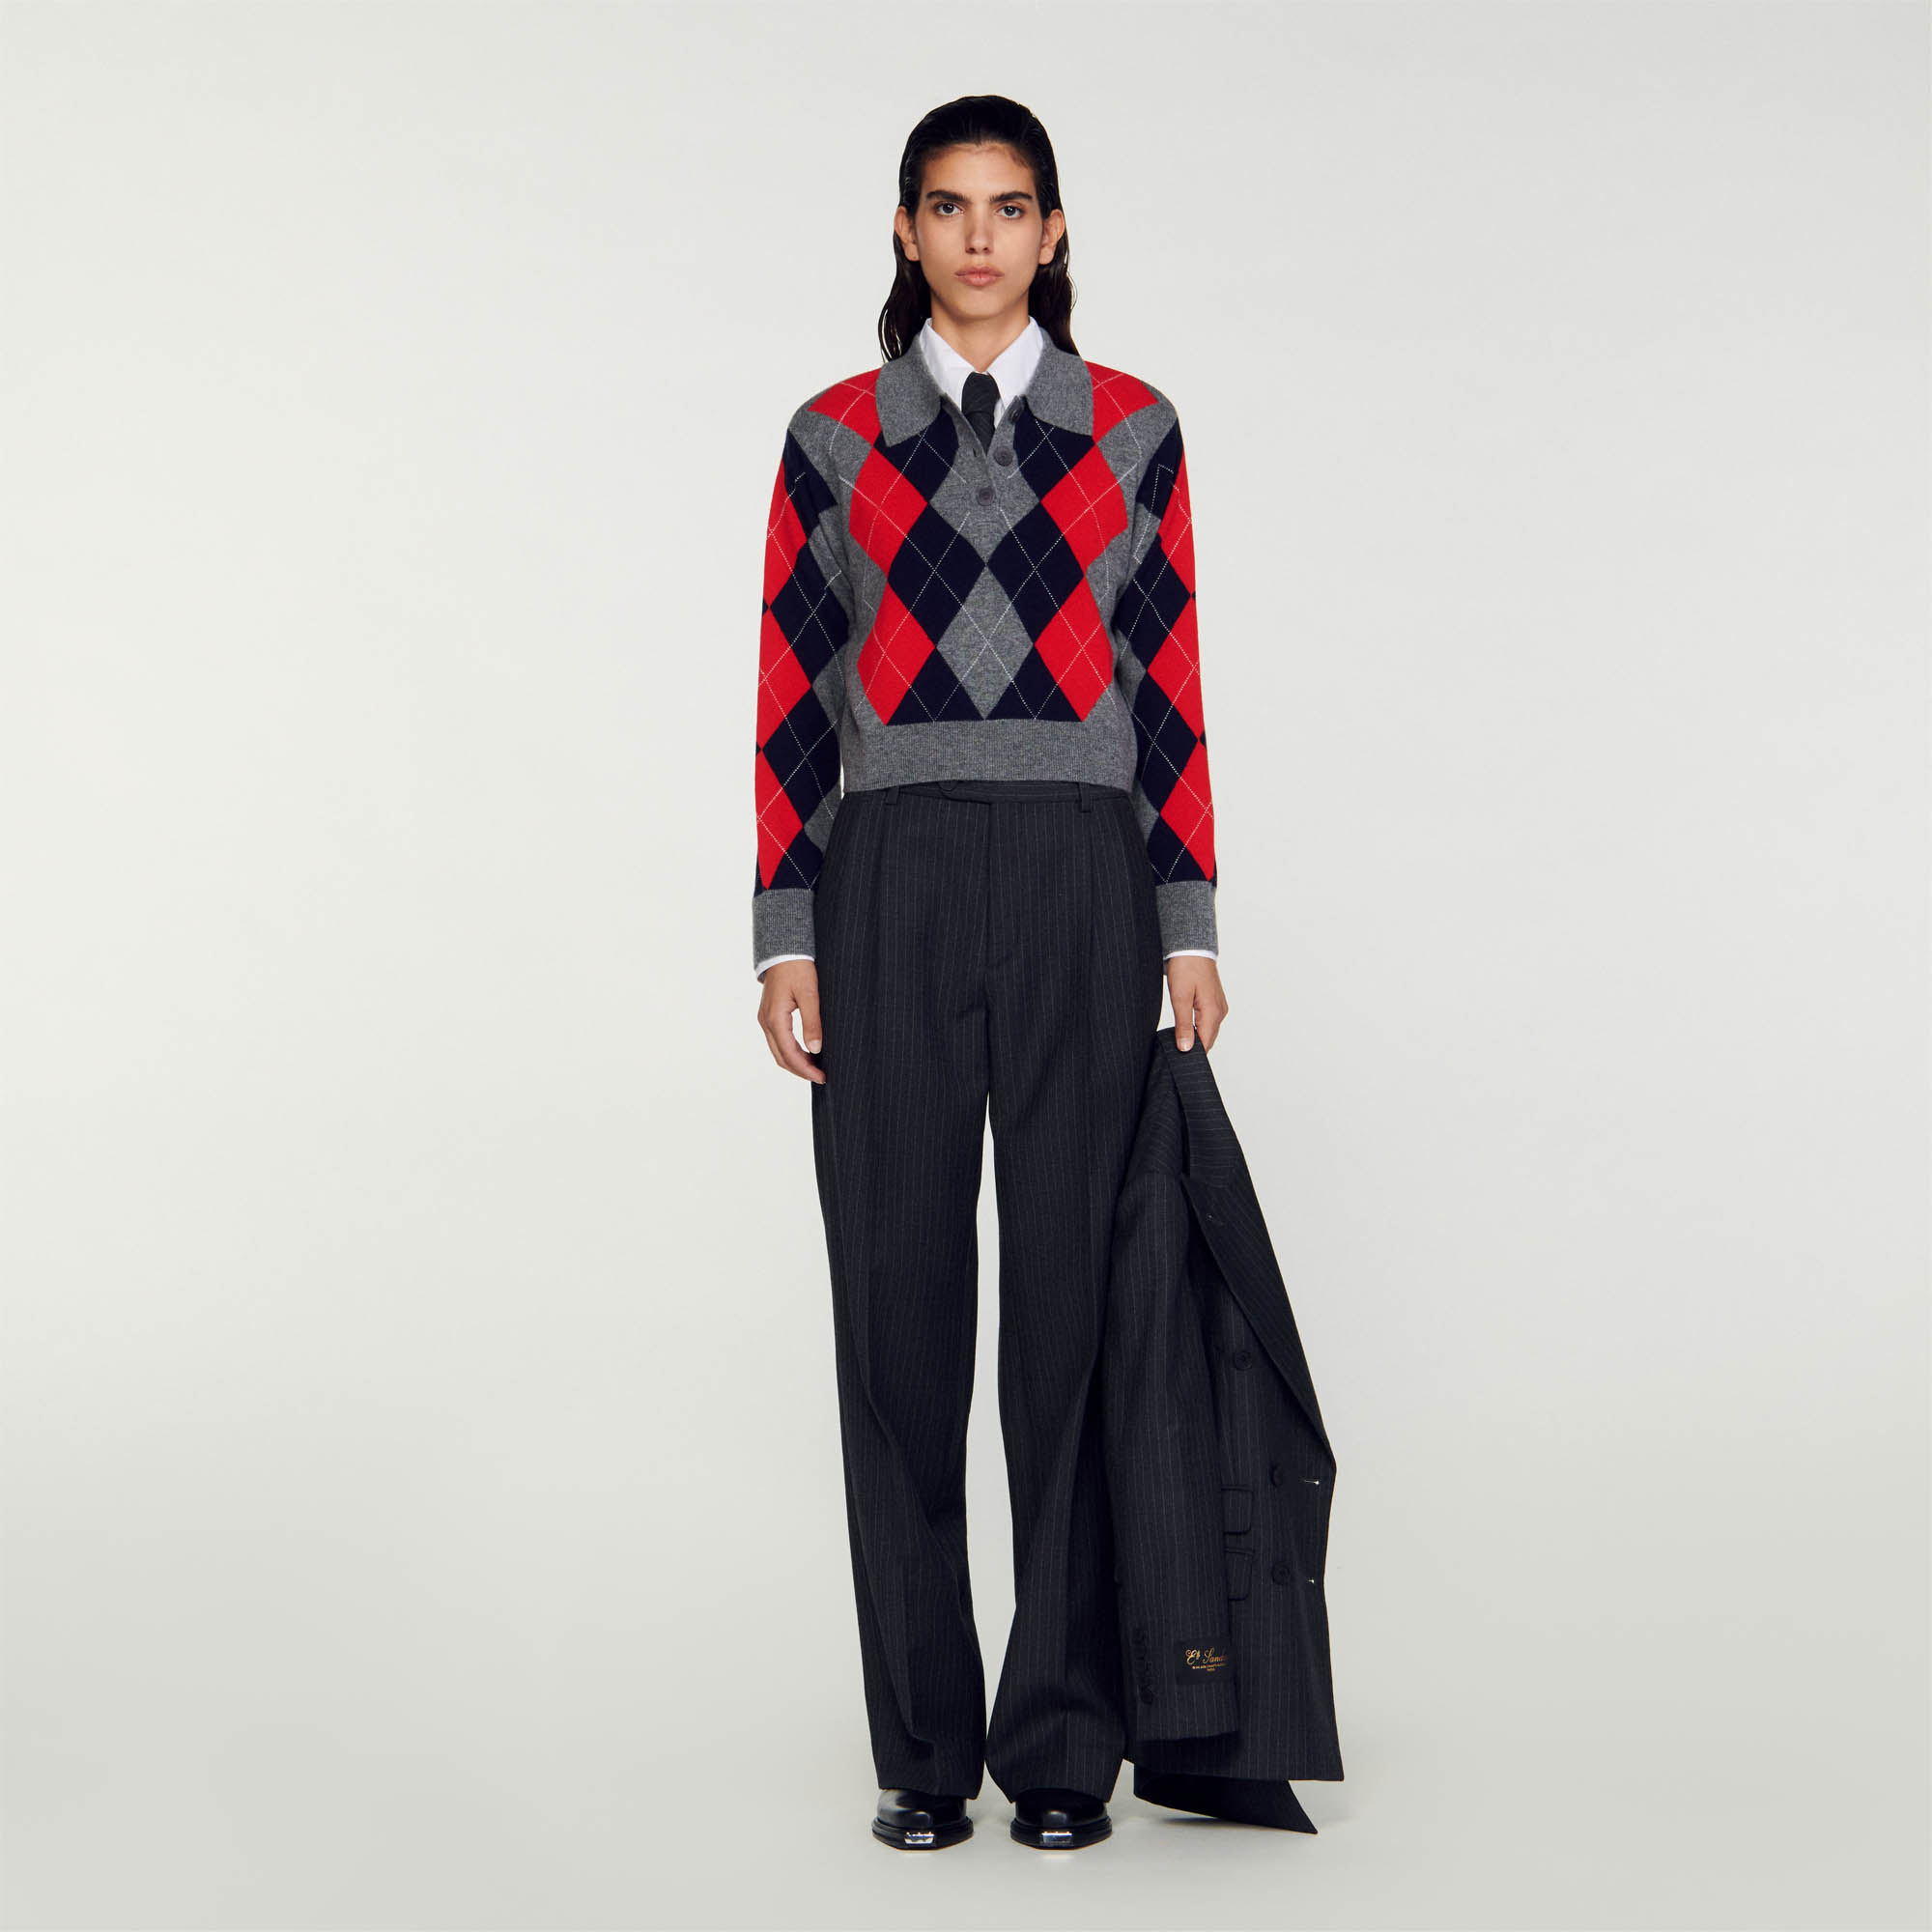 Sandro wool Wool and cashmere polo neck sweater with button-down collar and long sleeves, embellished with diamond motifs